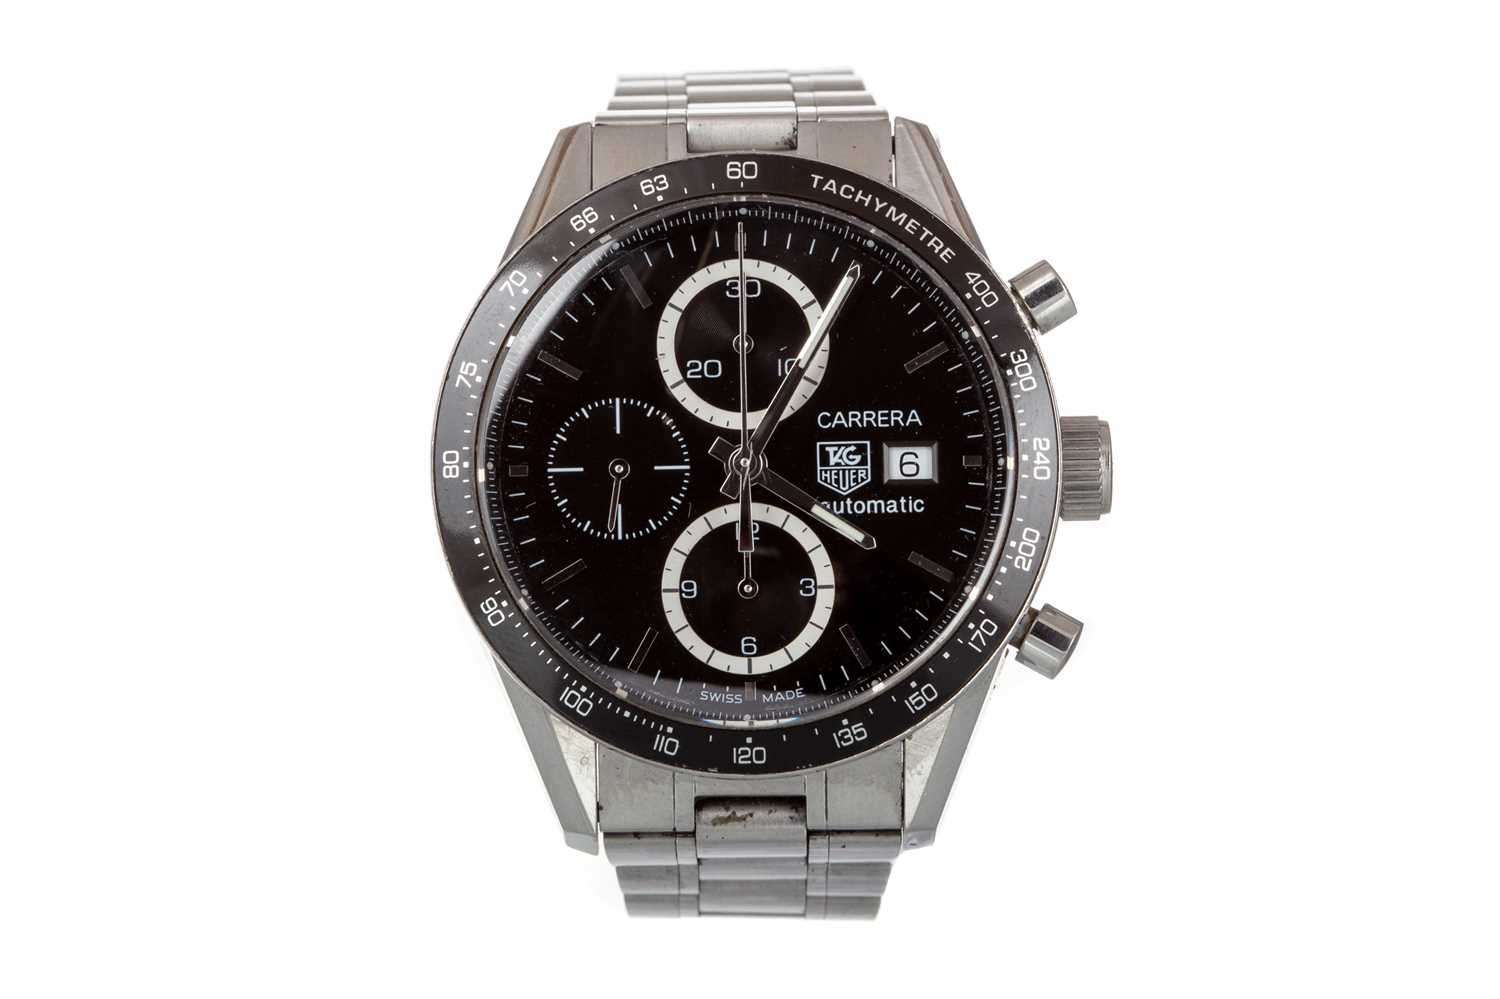 TAG HEUER CARRERA STAINLESS STEEL AUTOMATIC WRIST WATCH,